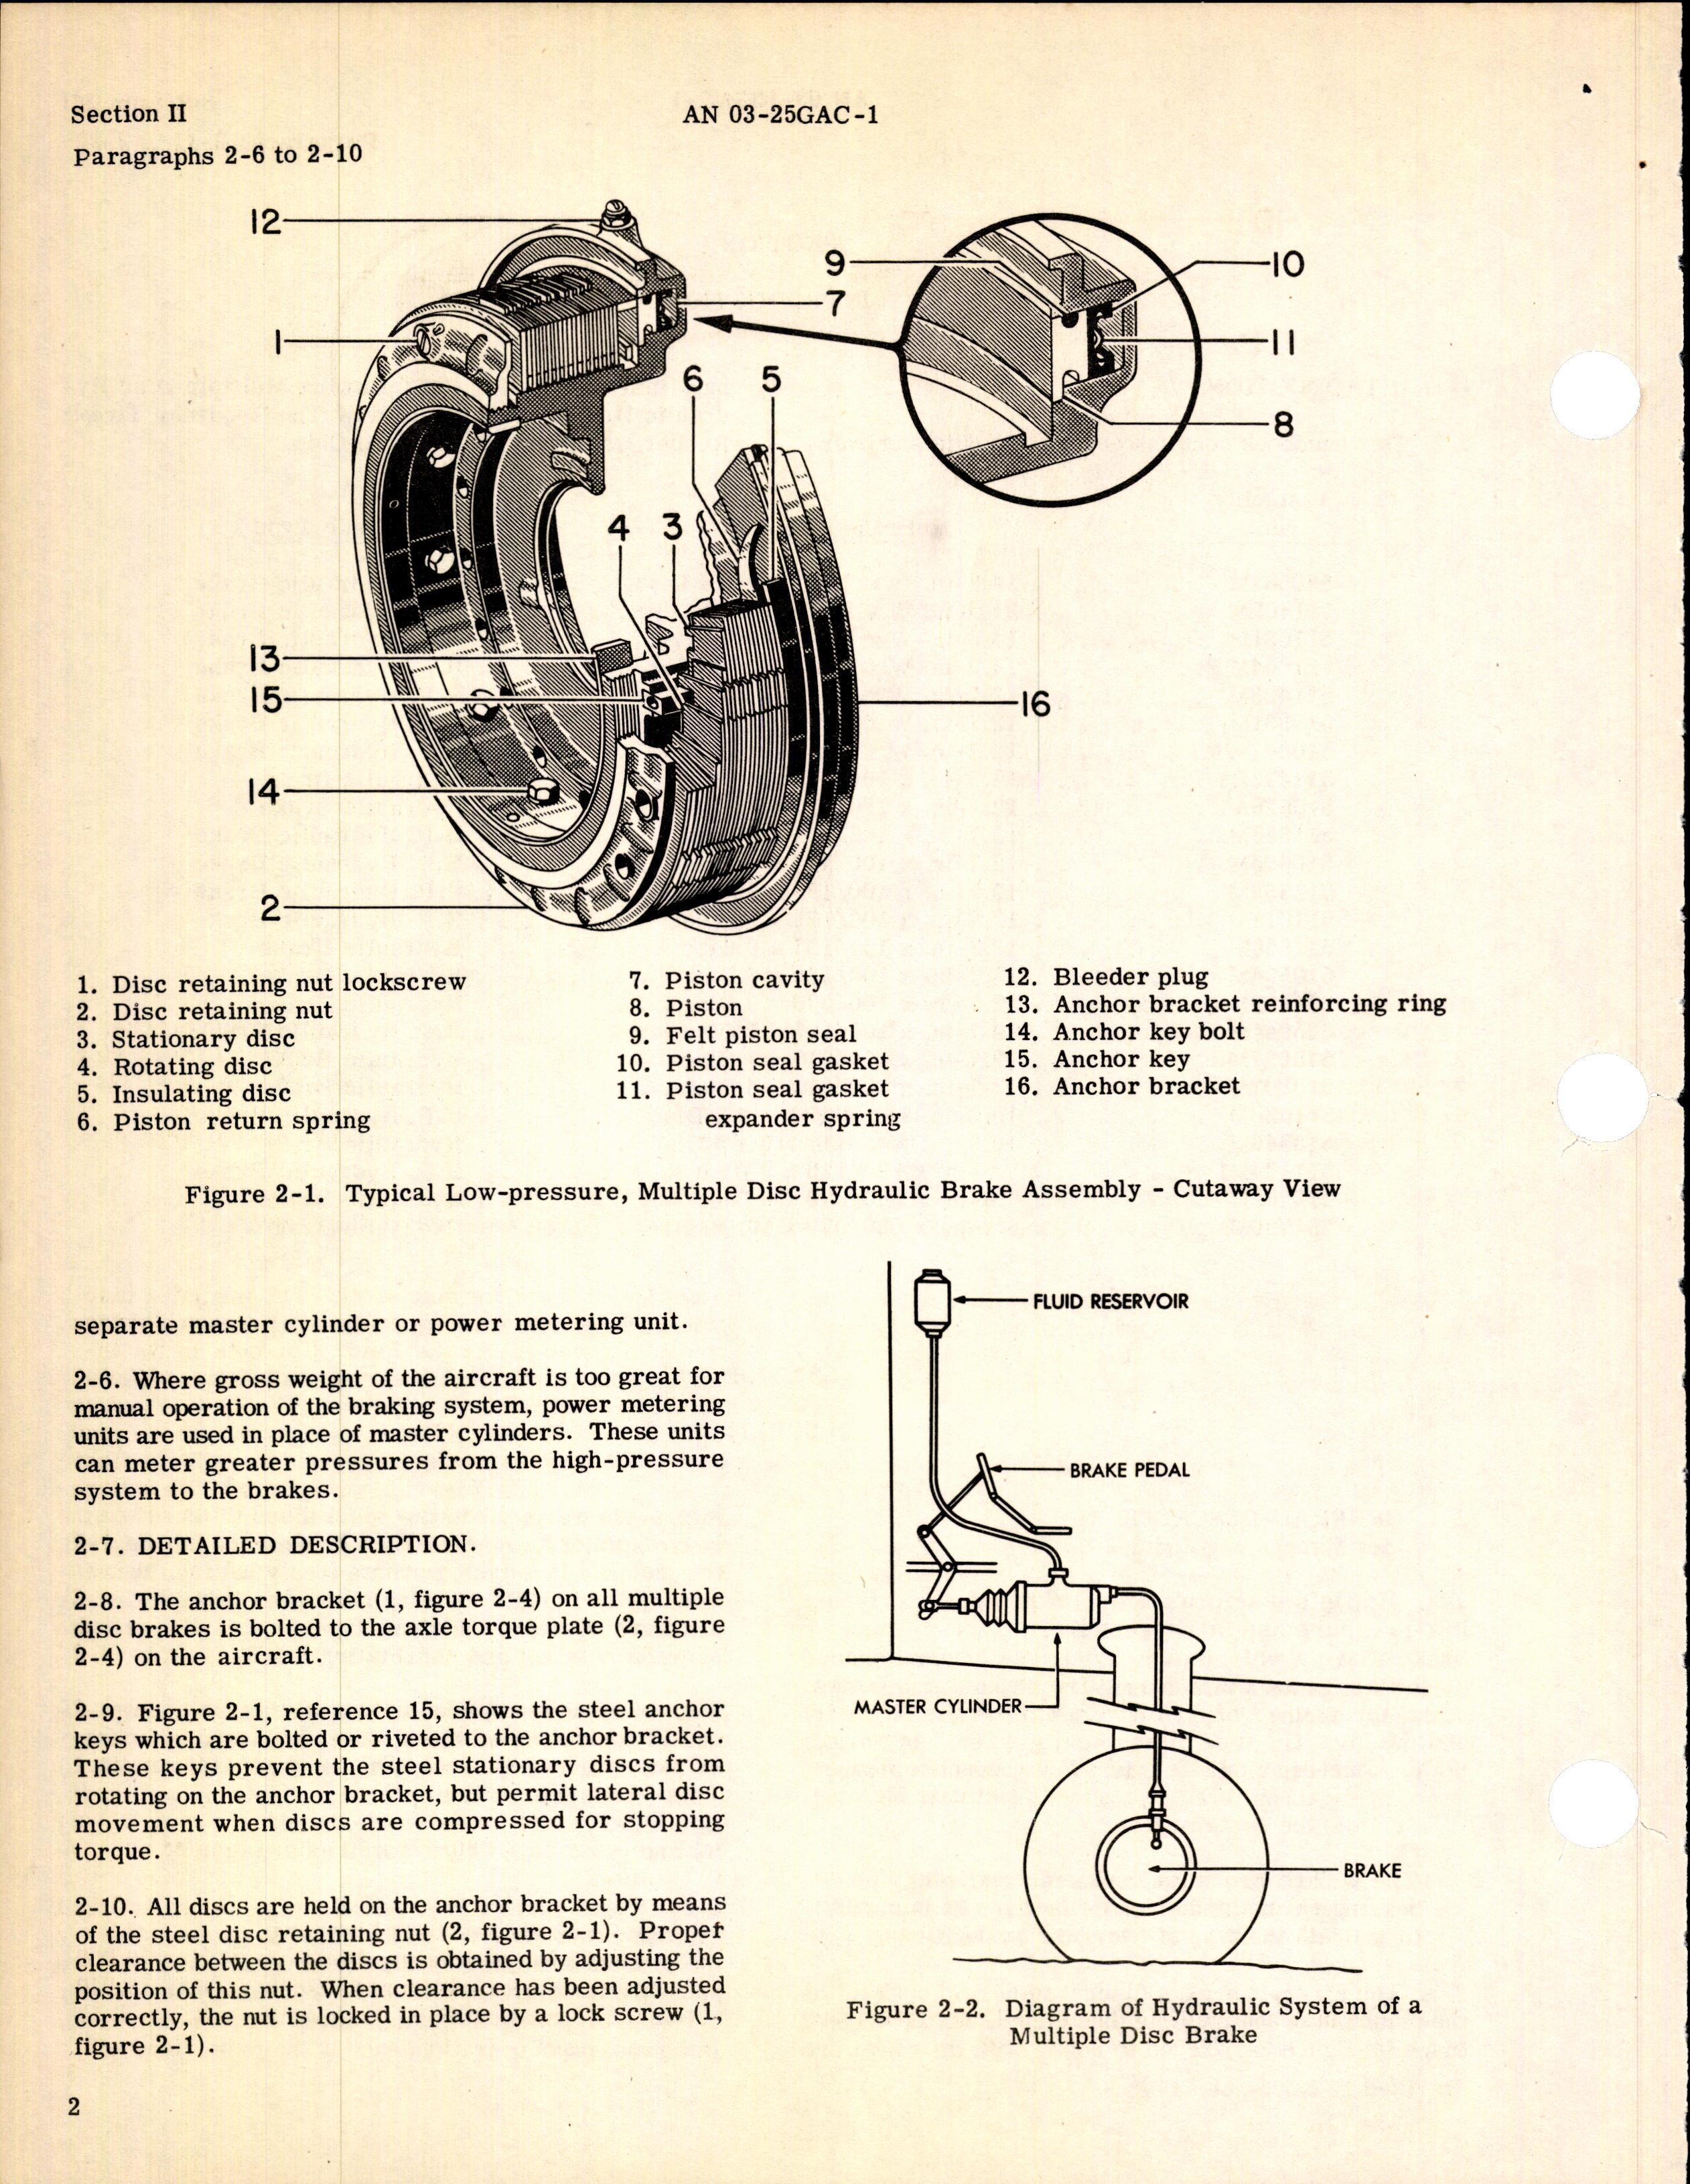 Sample page 10 from AirCorps Library document: Handbook Overhaul Instructions for Multiple Disc Brakes (Goodyear)